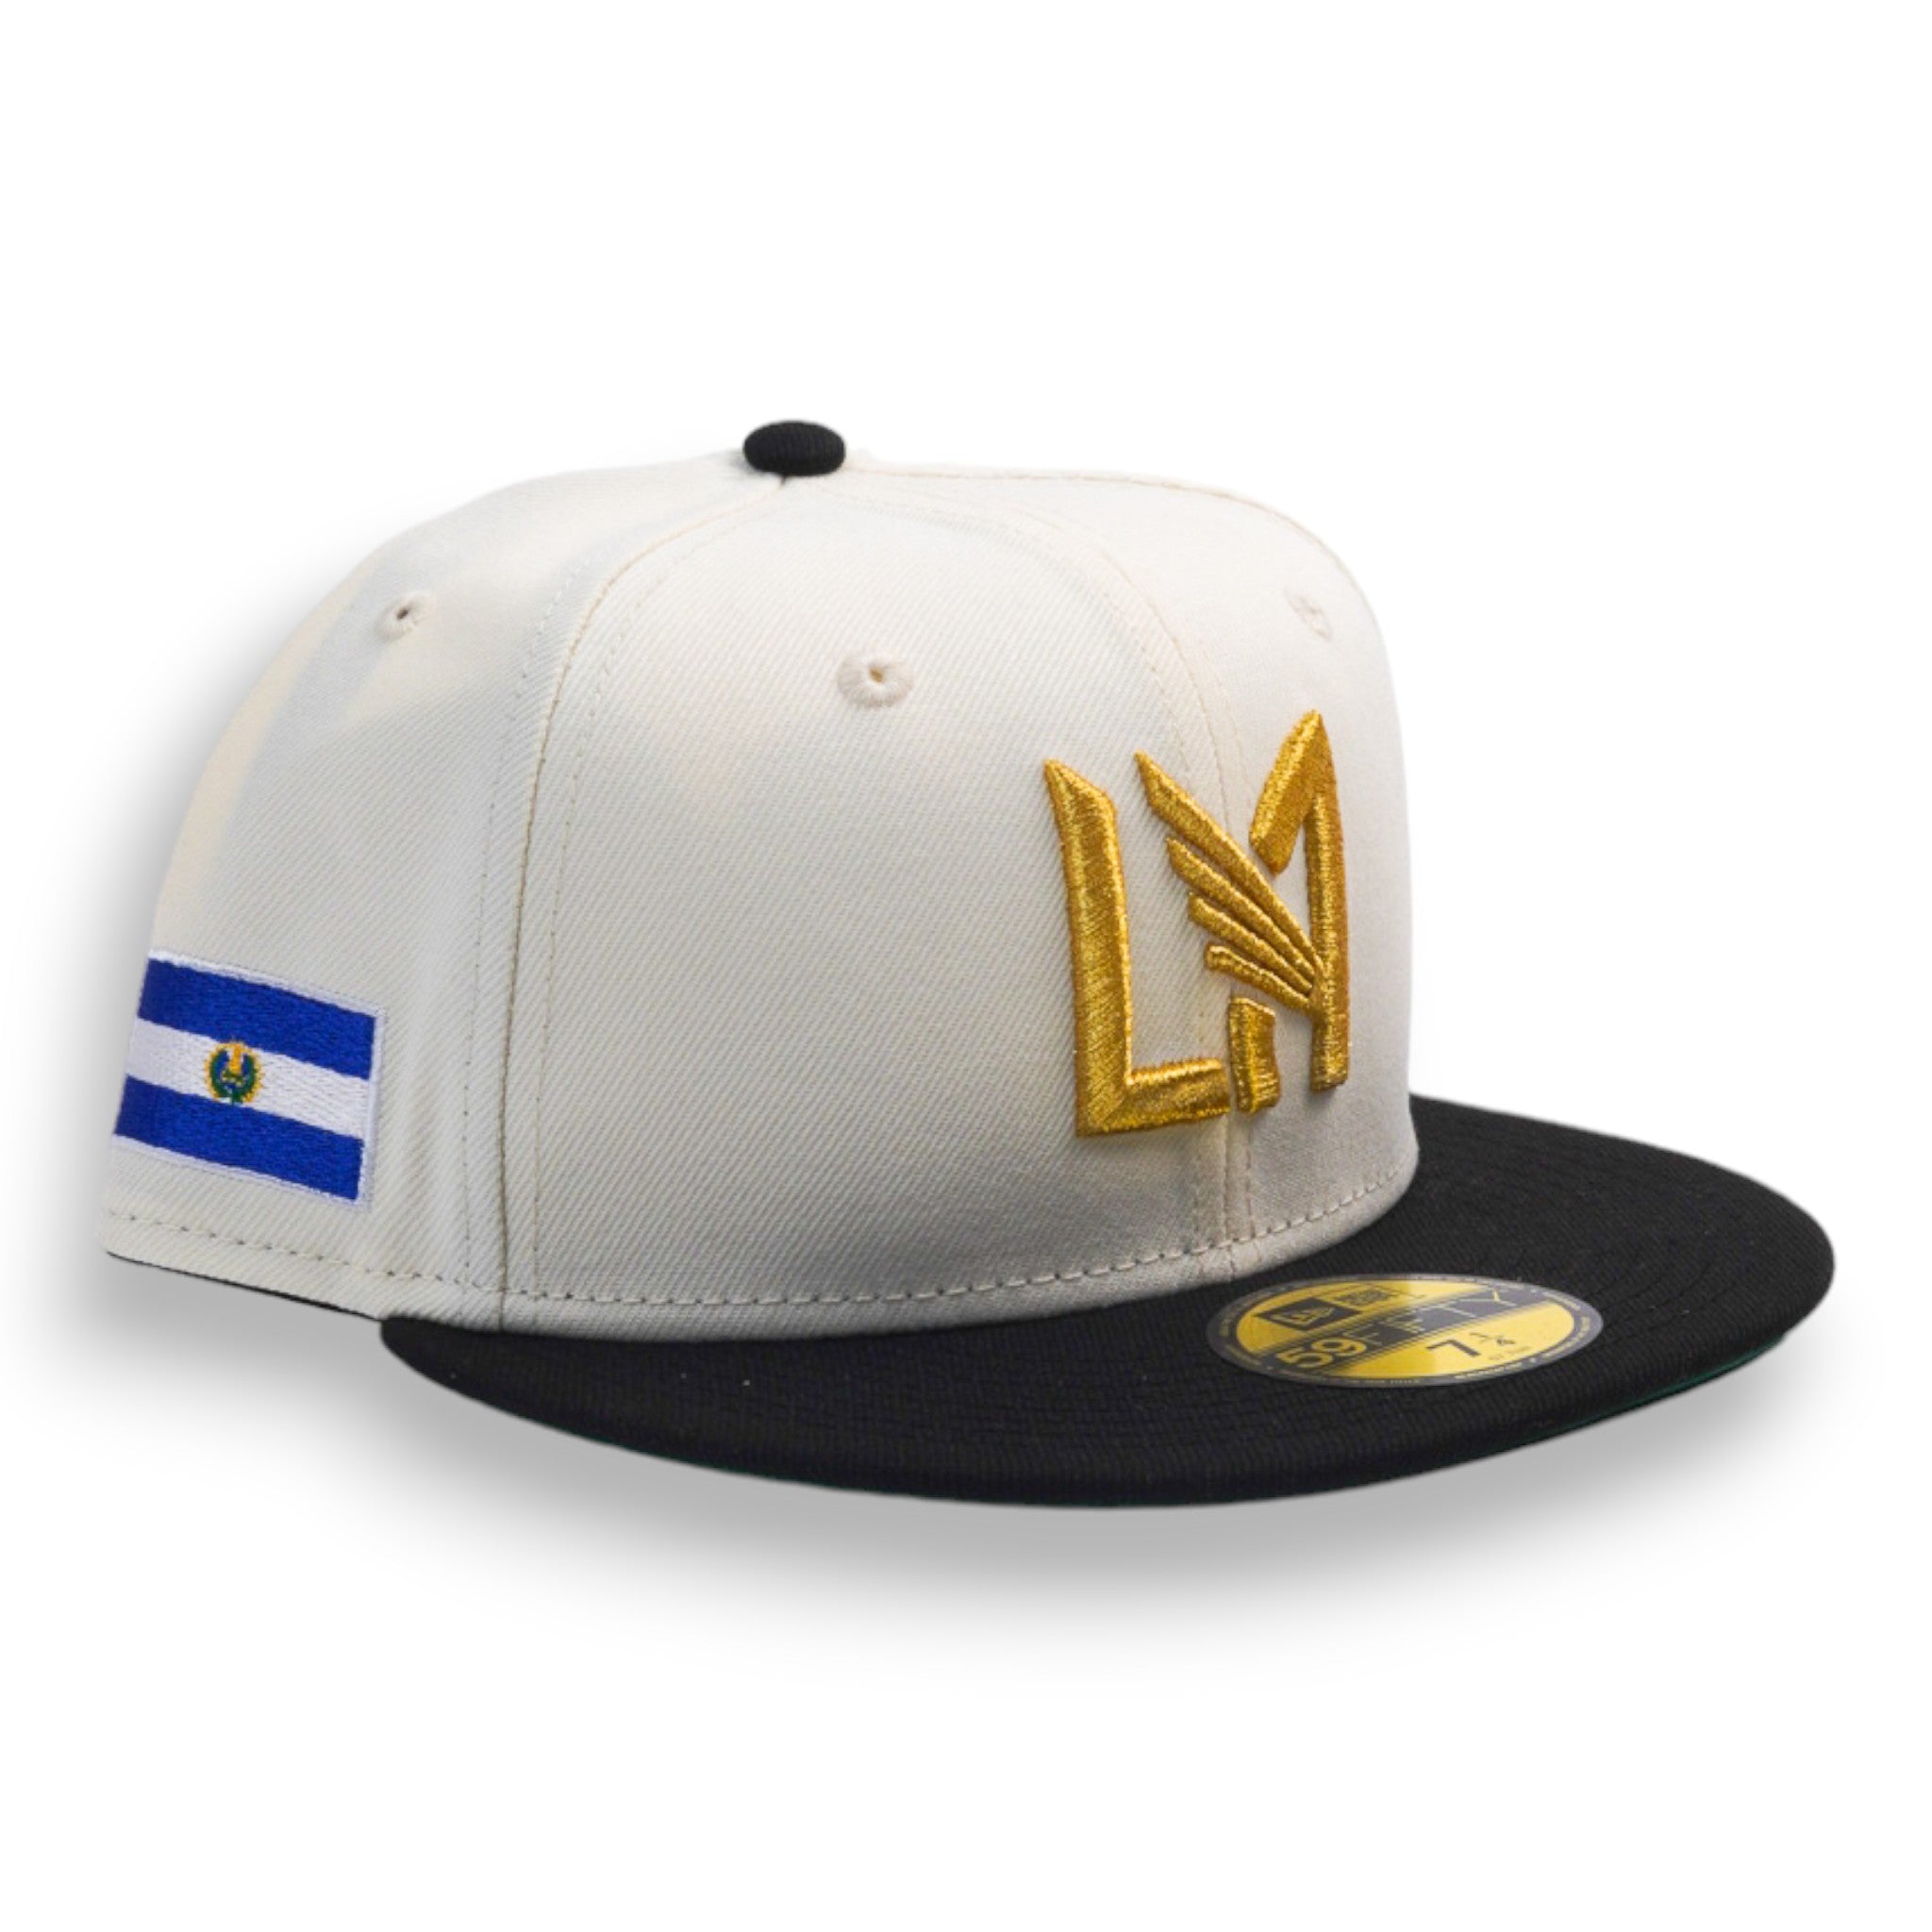 The Magnolia Park x New Era 59Fifty Fitted LAFC Heritage Collection (El Salvador Flag) (Chrome/Black)